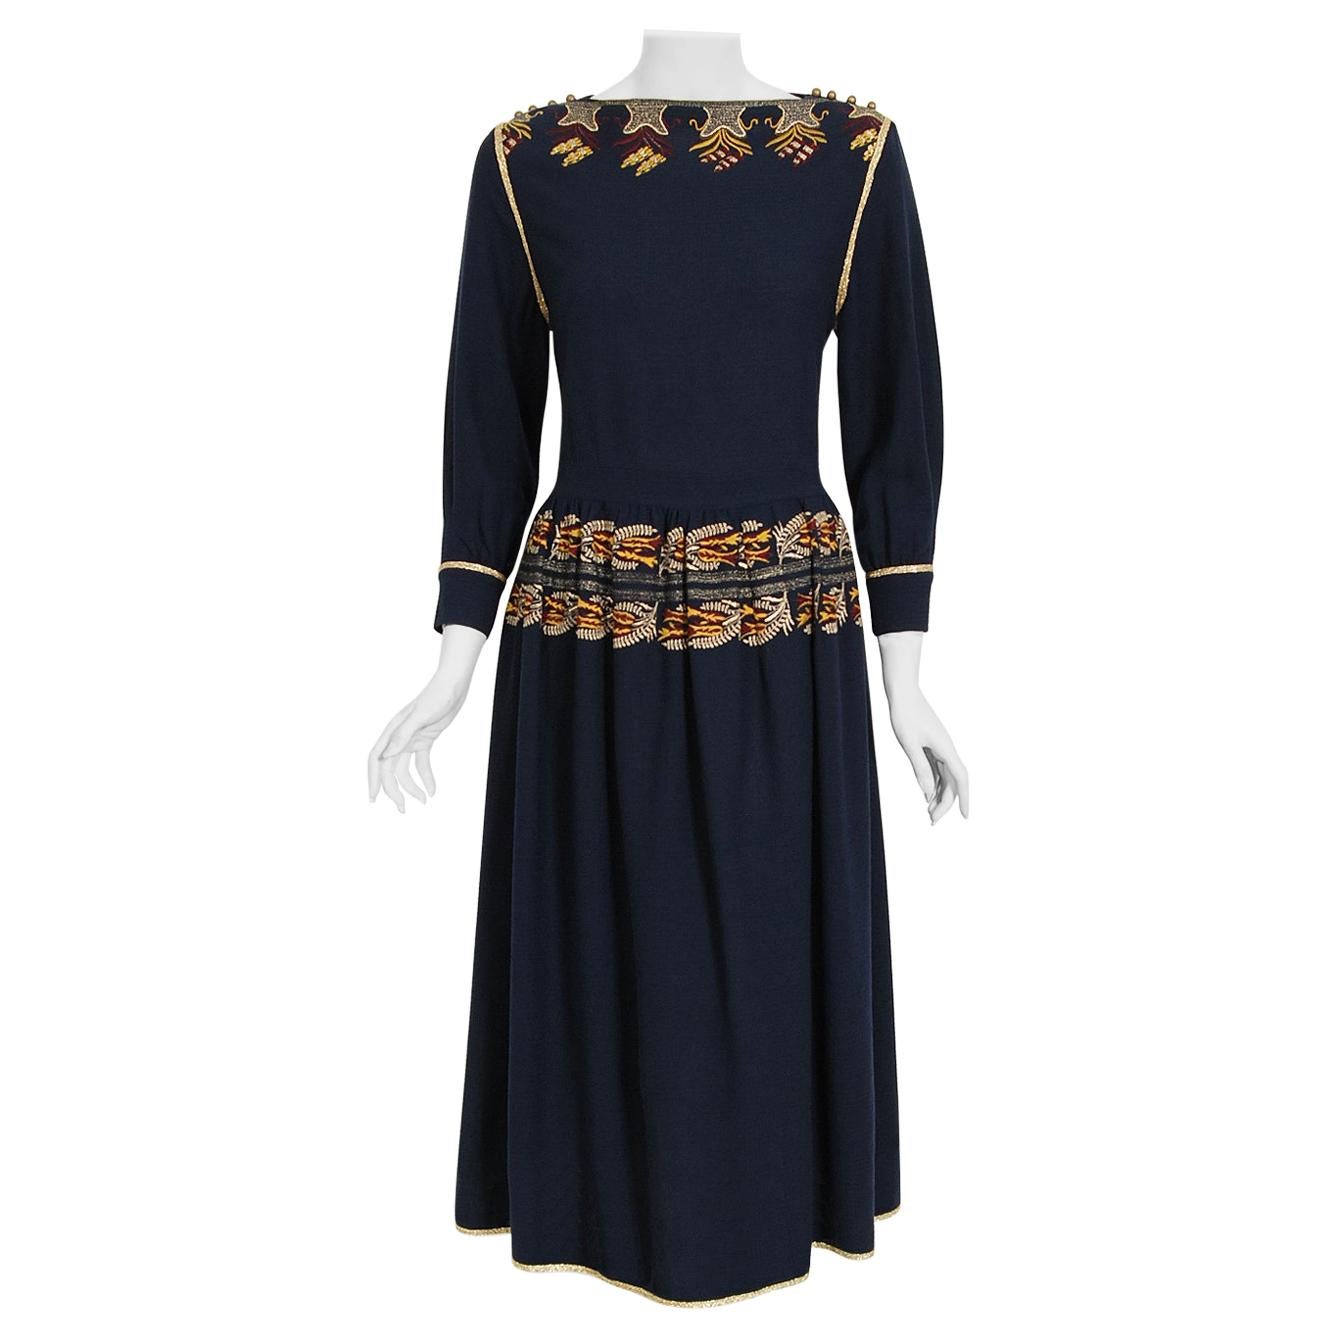 Vintage 1979 Karl Lagerfeld for Chloe Navy Blue Metallic Embroidered Knit Dress